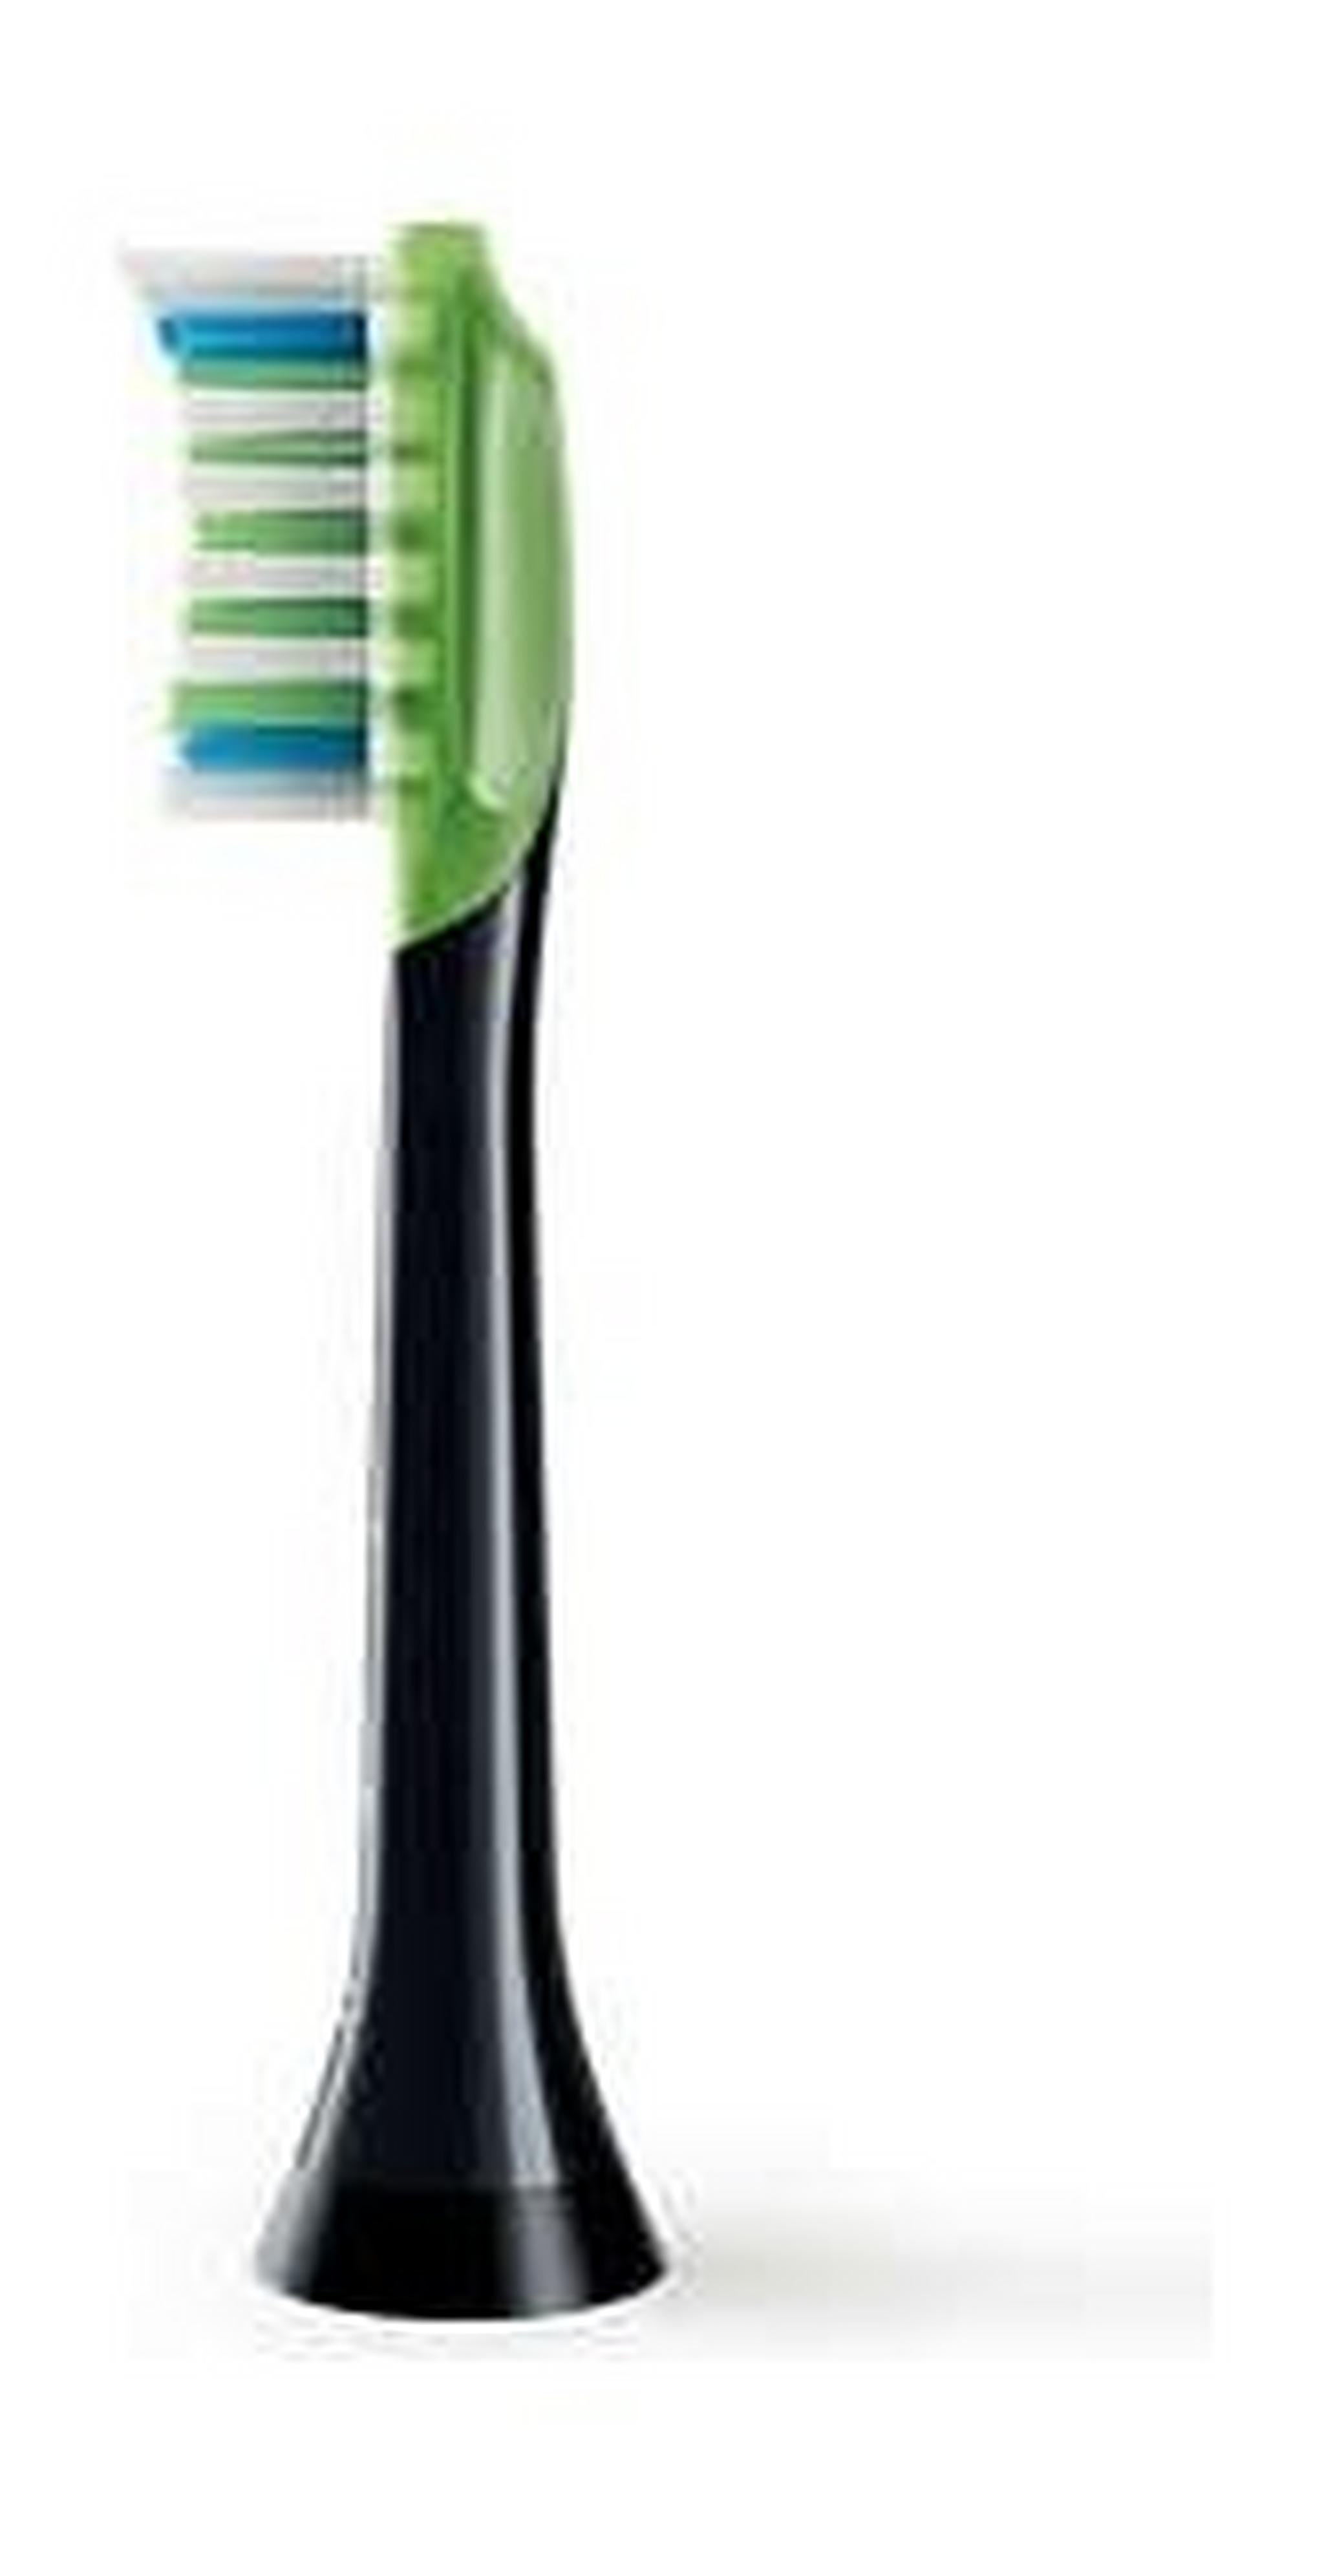 Philips Sonicare W3 Standard Sonic Toothbrush Heads